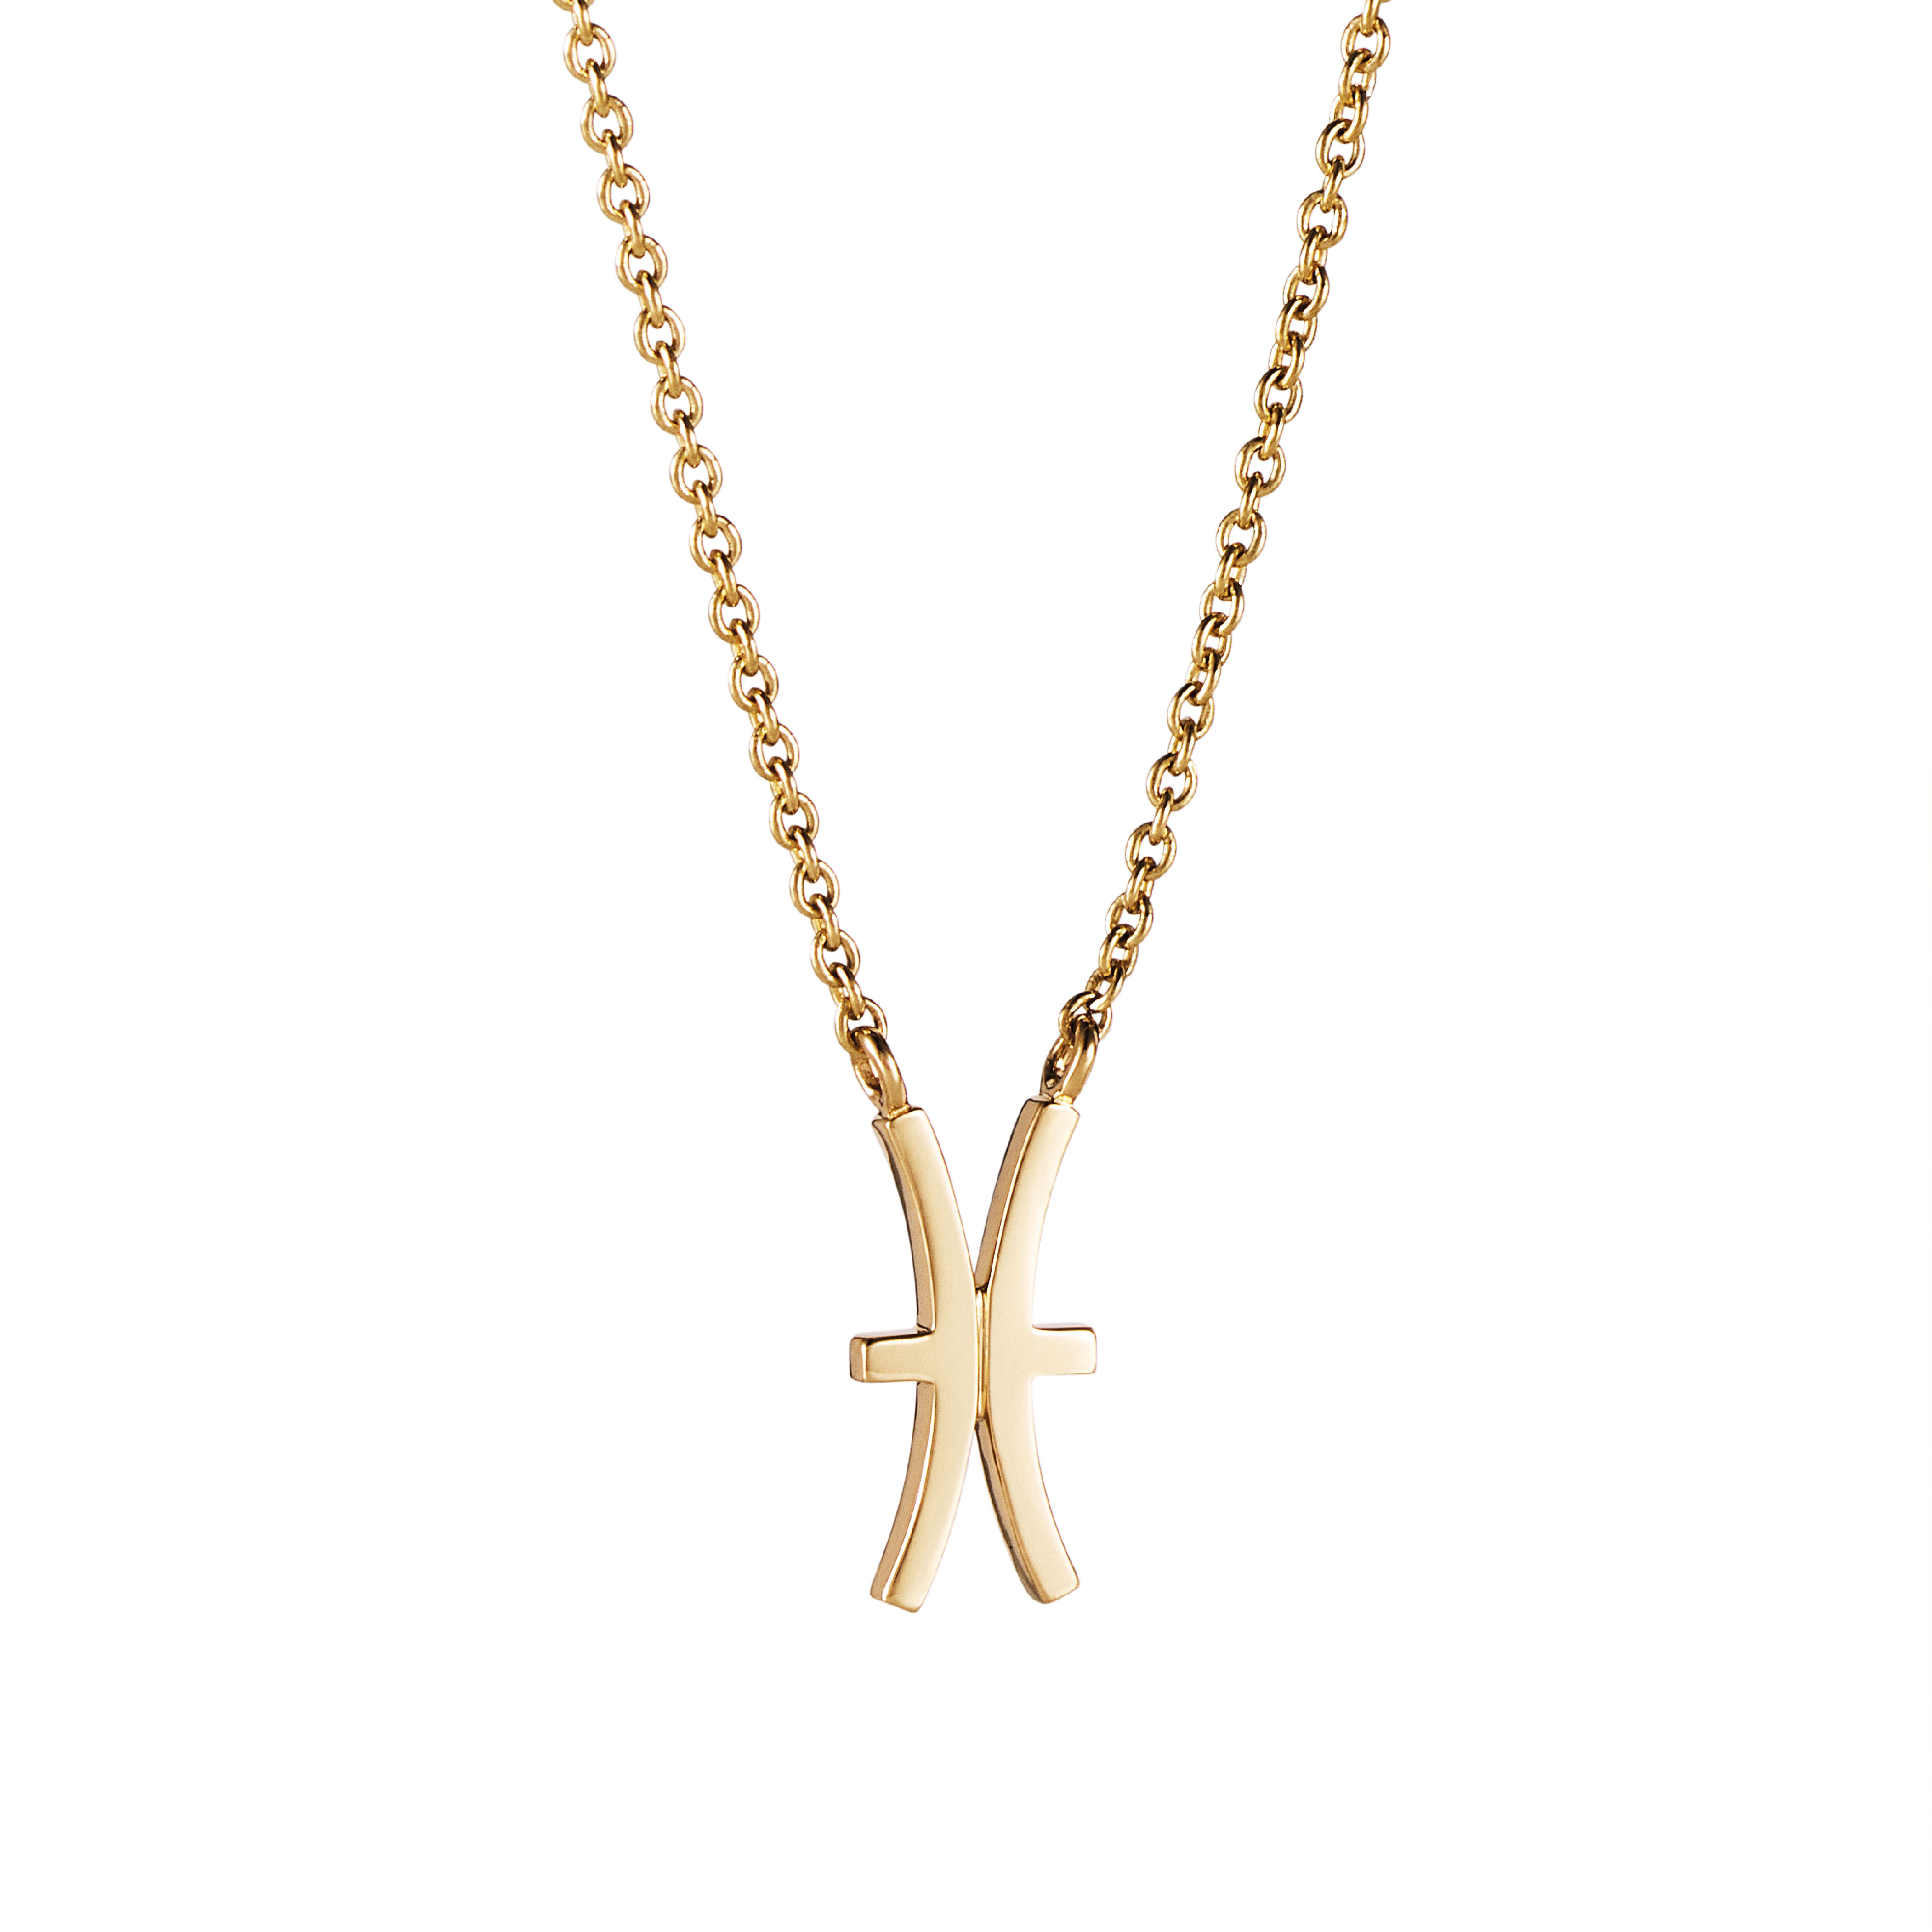 Efva Attling Double Trouble Necklace 40/42/45 CM - GULD